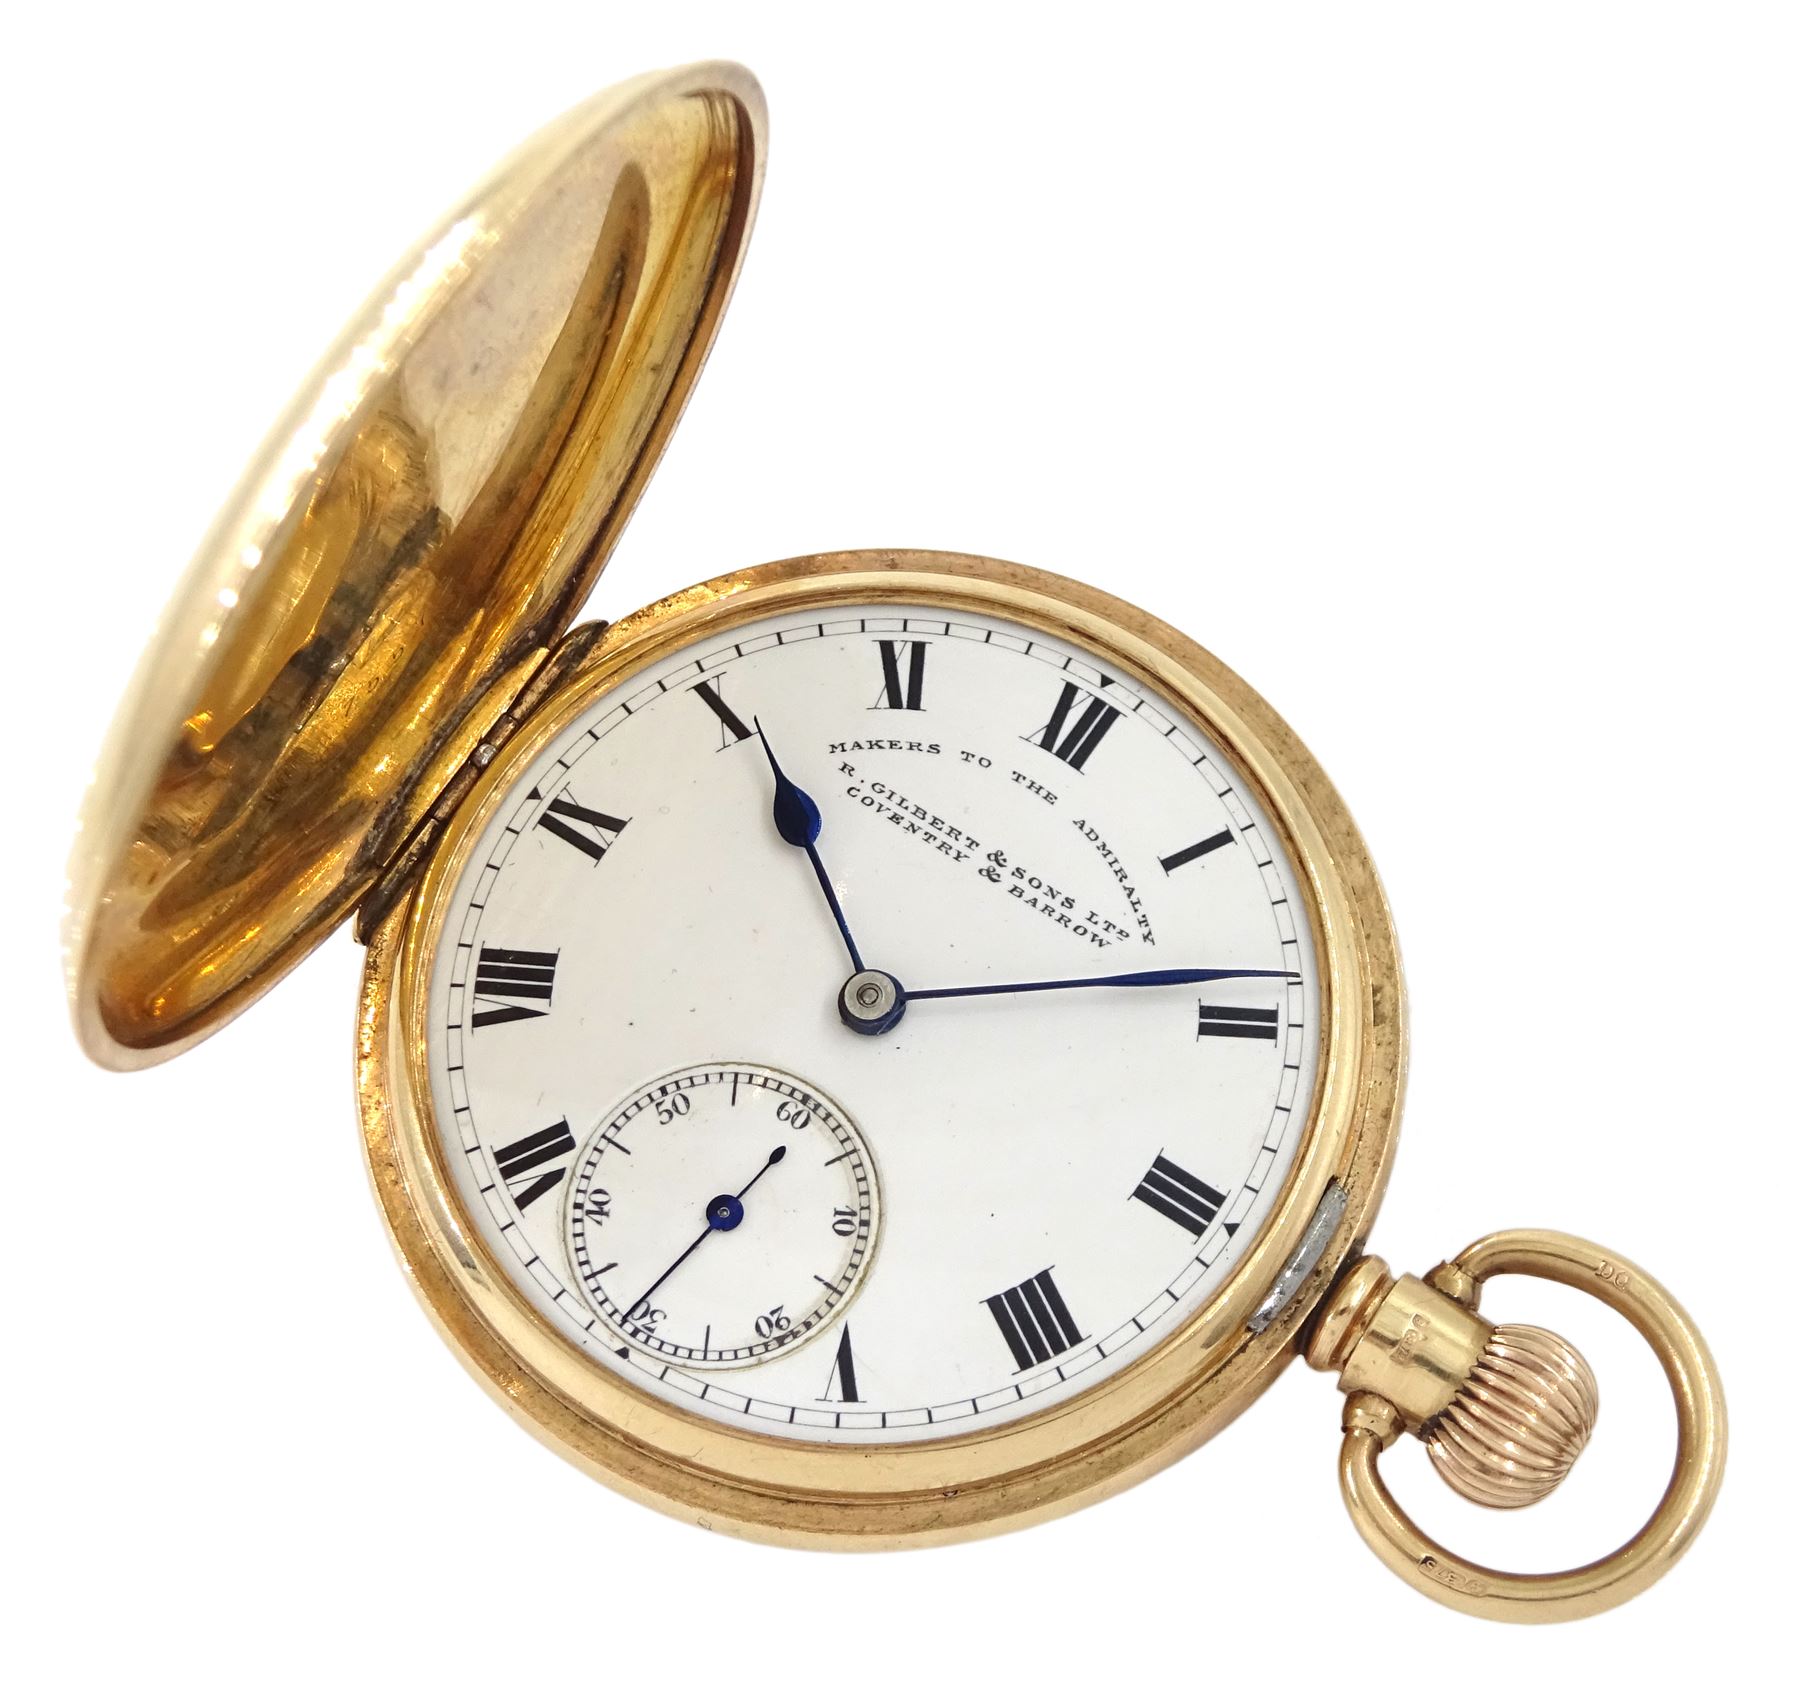 9ct gold full hunter keyless lever presentation pocket watch by R.Gilbert & Sons Ltd 'Makers to the